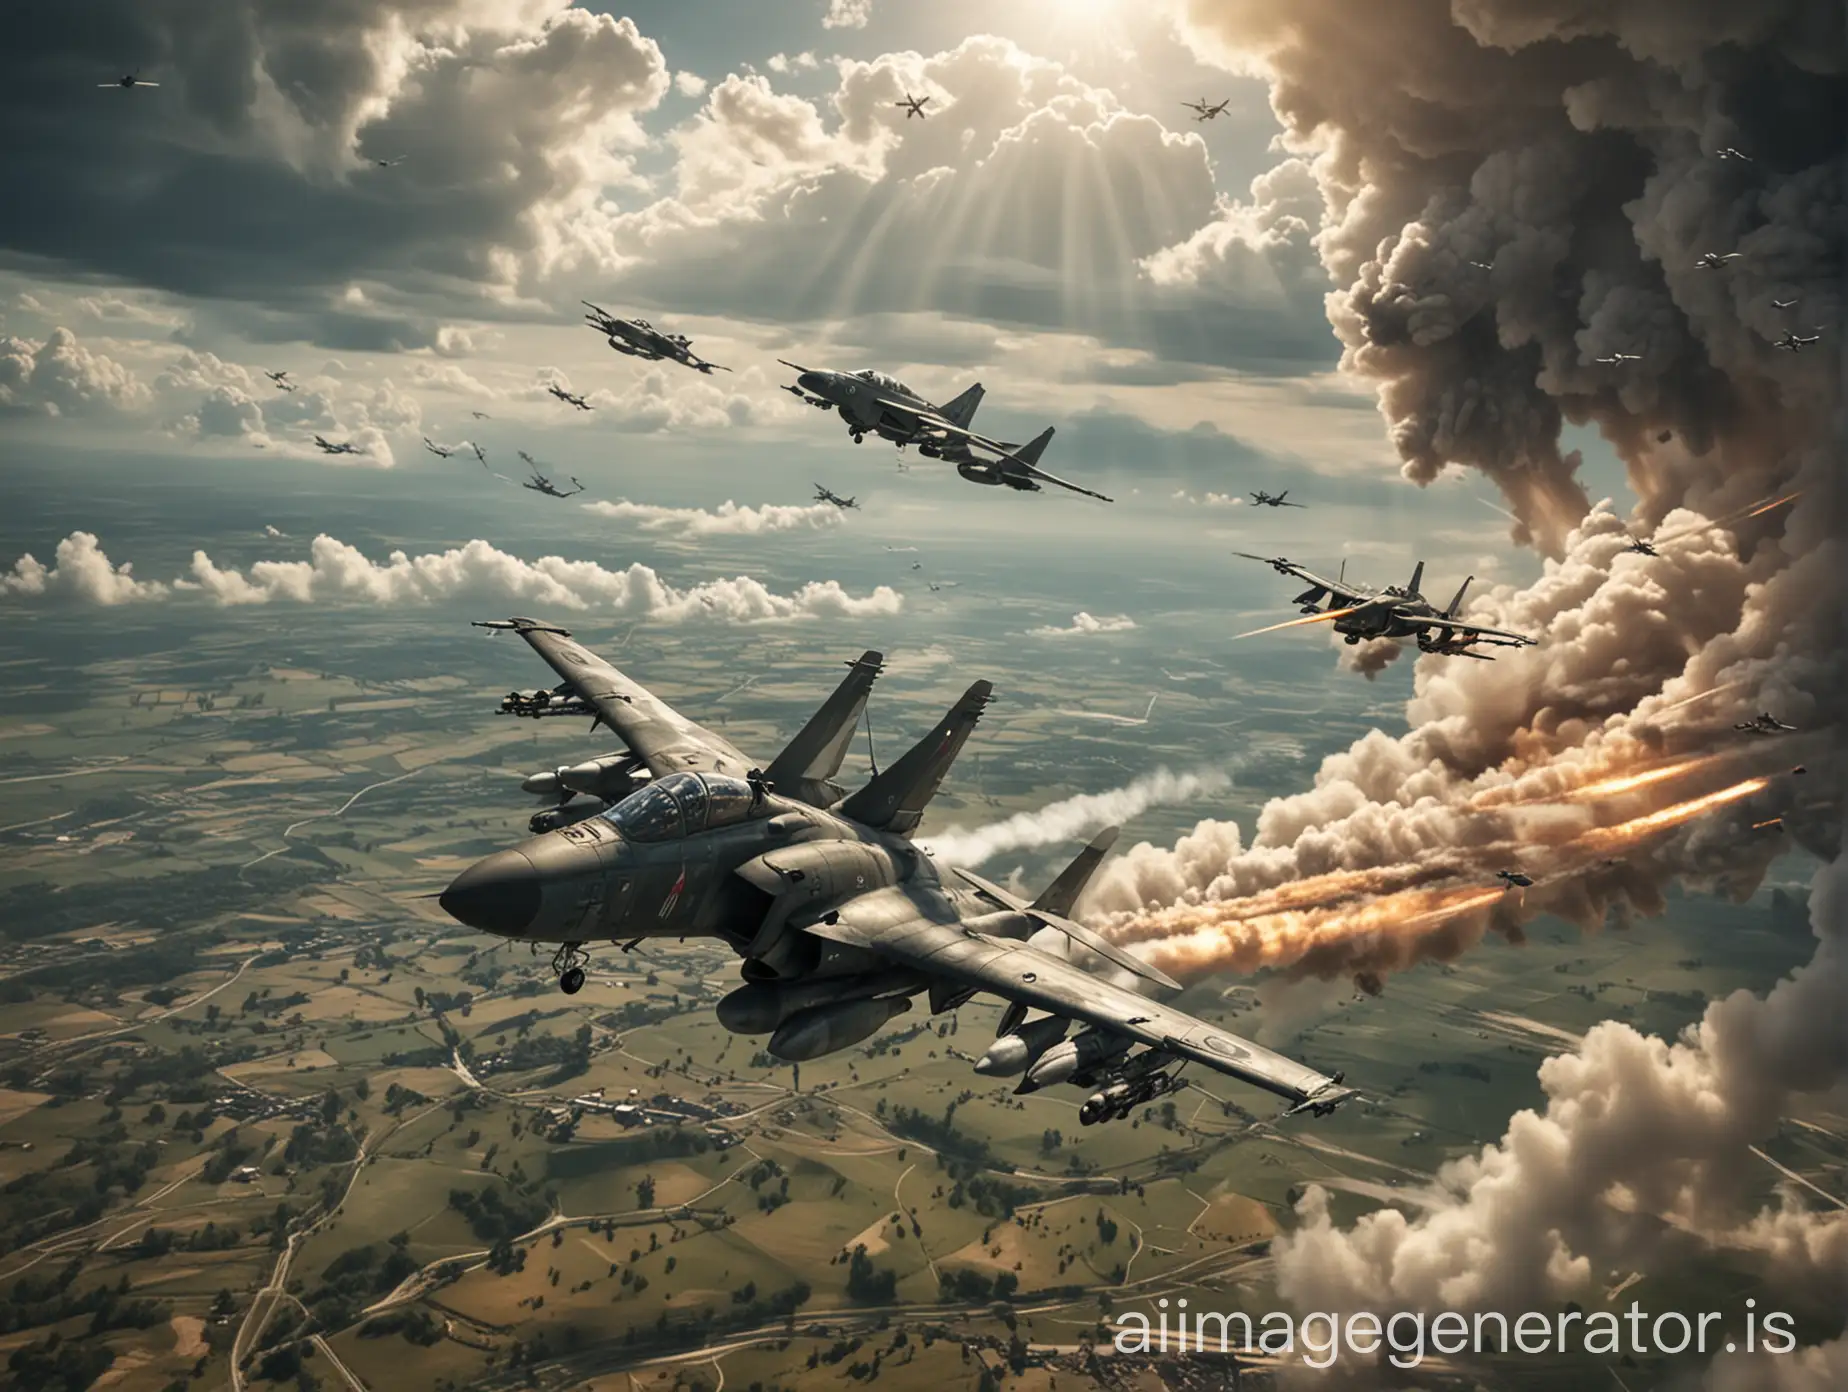 Dramatic-War-Scene-Fighter-Planes-and-Lone-Soldier-in-Full-HD-Landscape